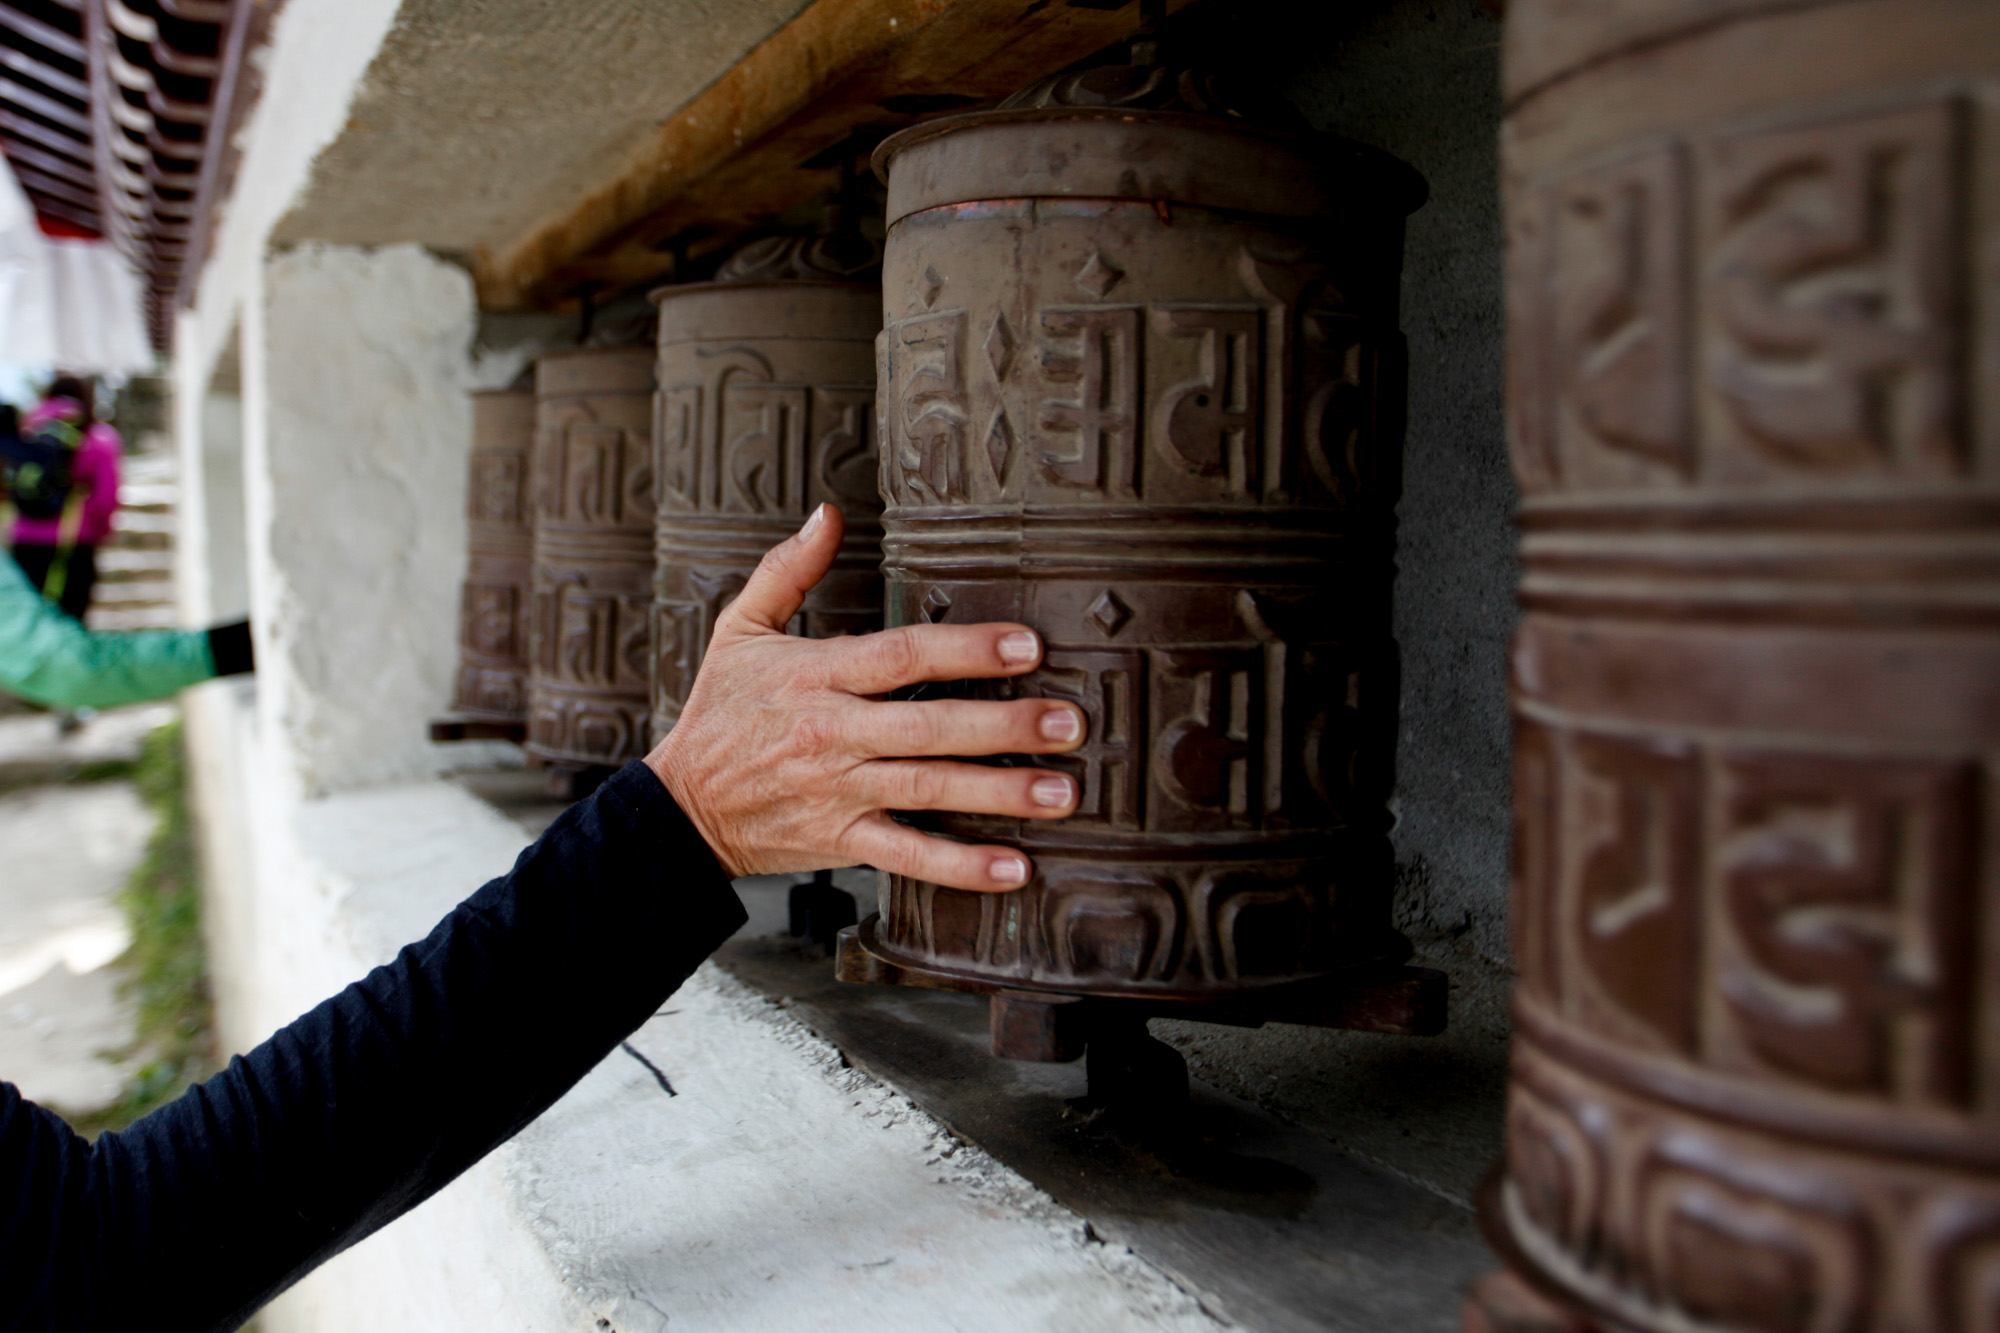 Prayer wheels in a monastary in the Himalayas